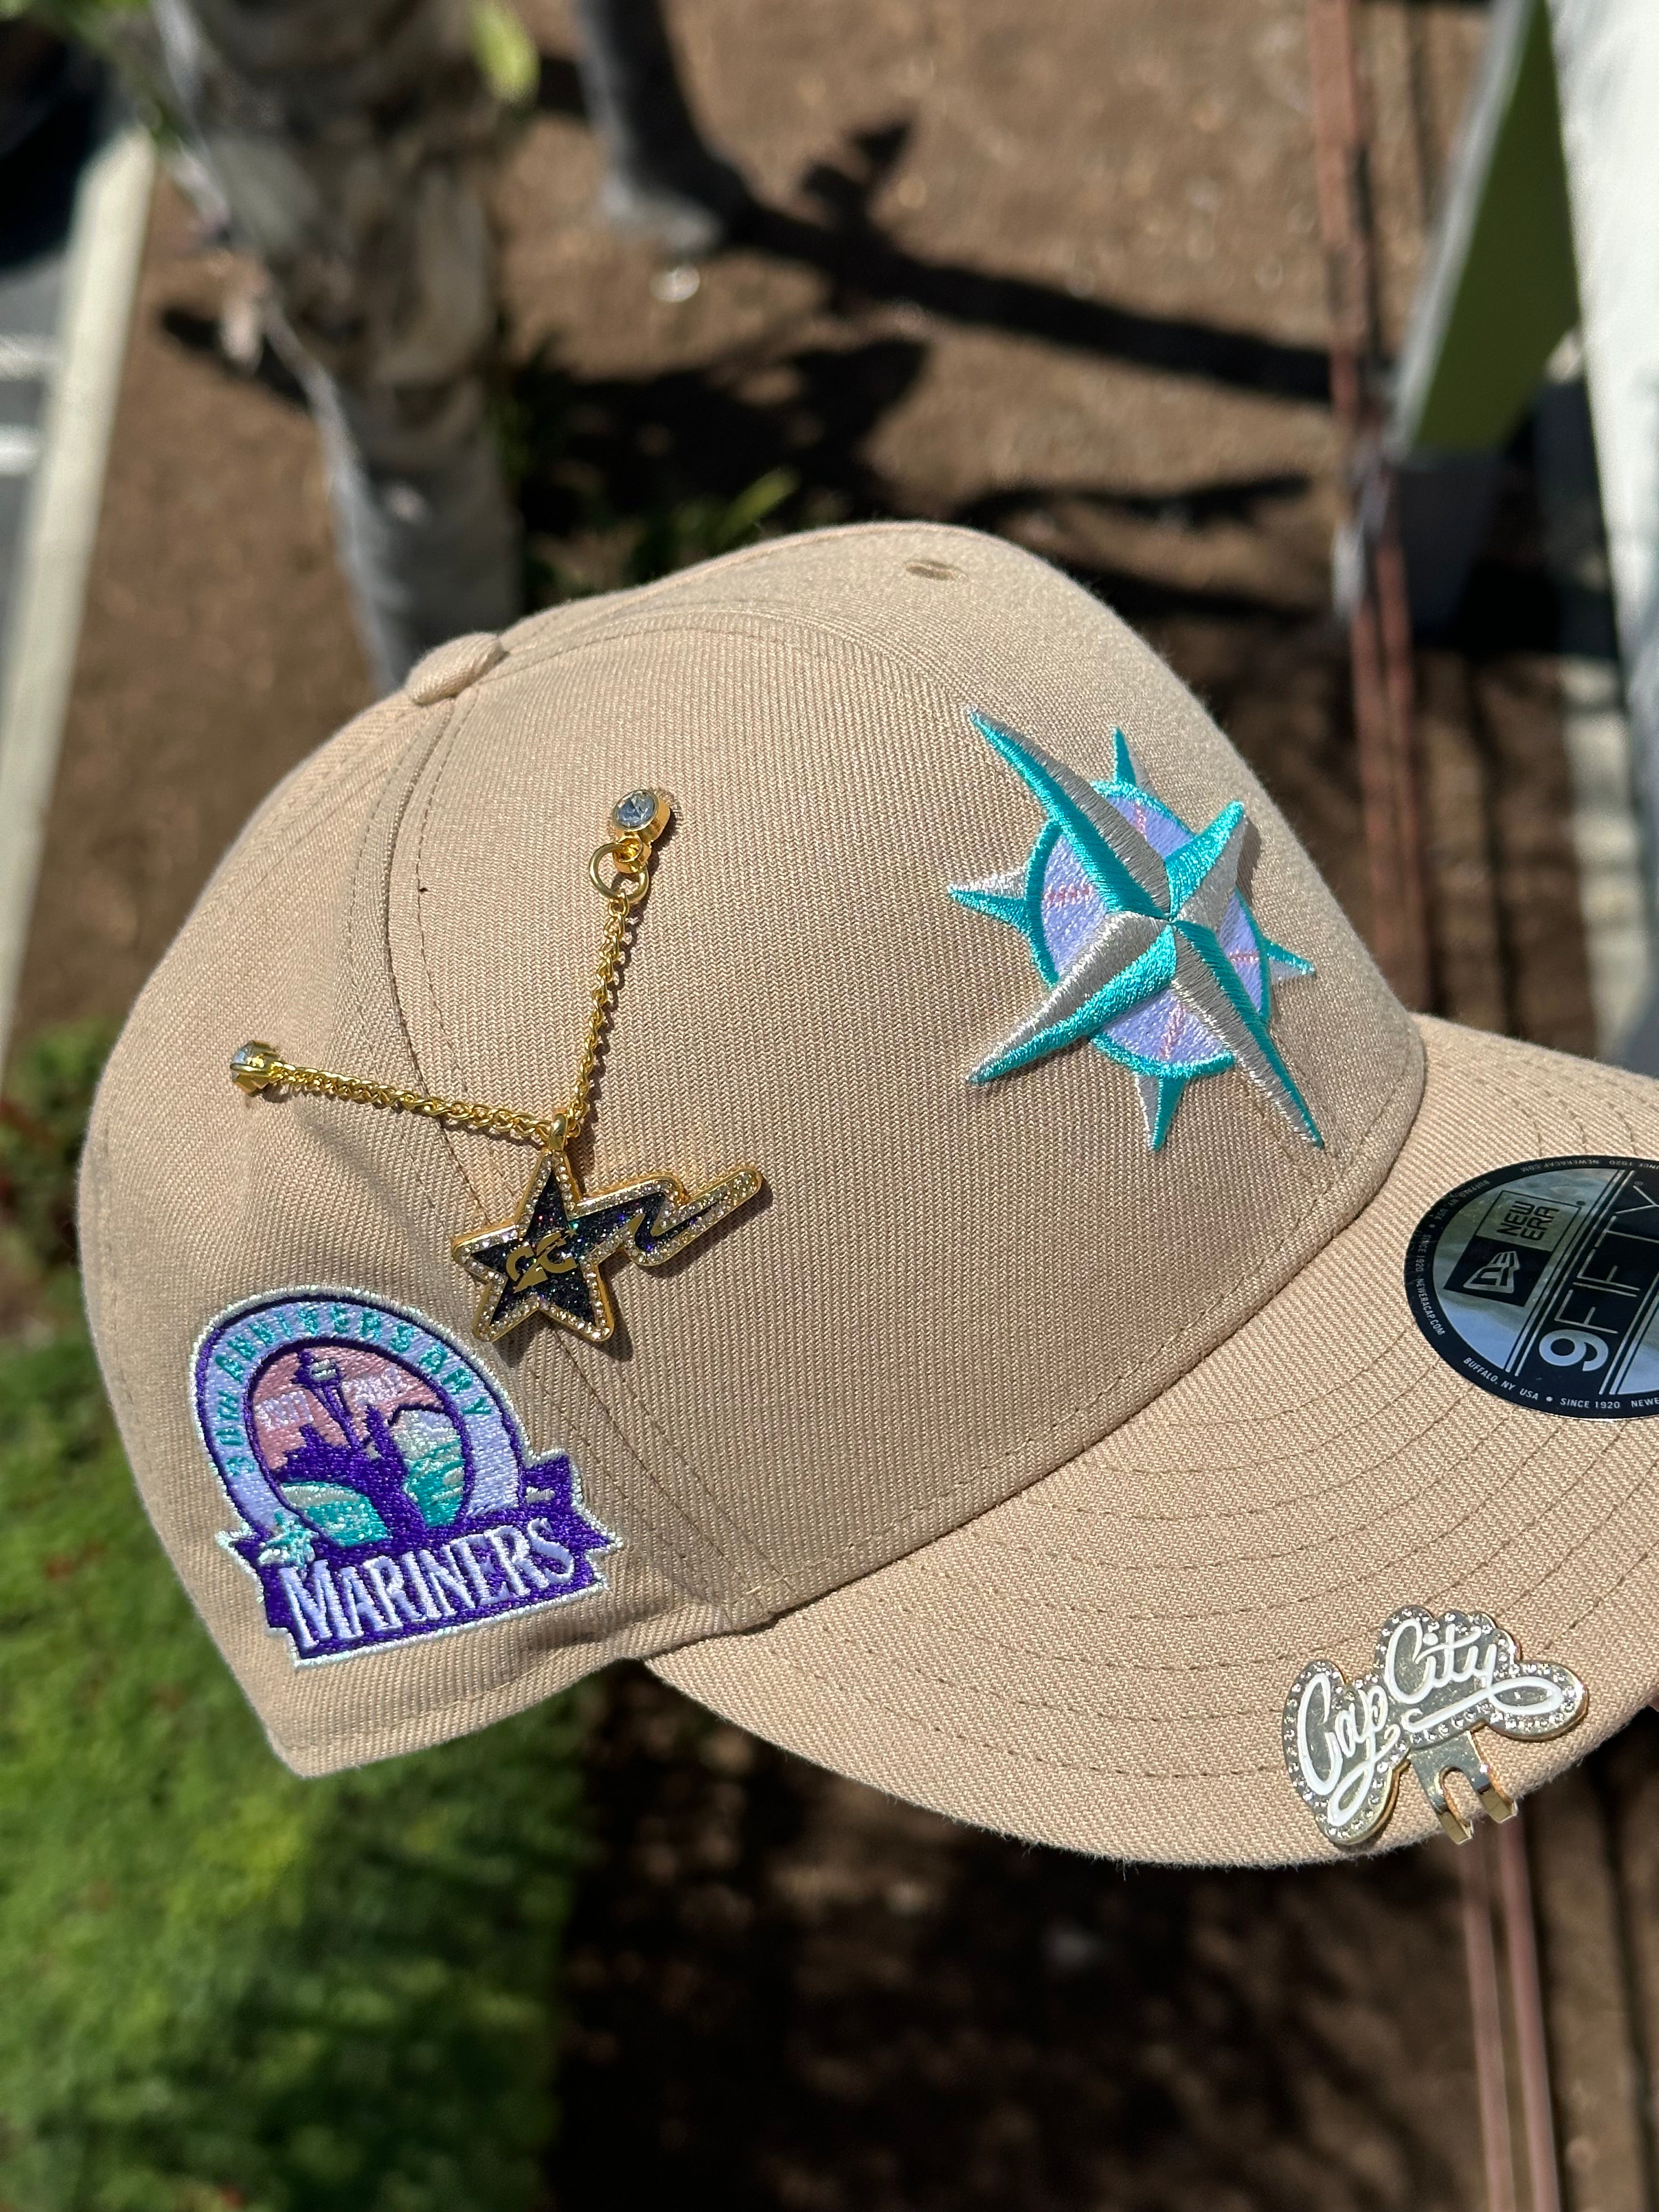 NEW ERA EXCLUSIVE 9FIFTY KHAKI SEATTLE MARINERS SNAPBACK W/ 30TH ANNIVERSARY PATCH